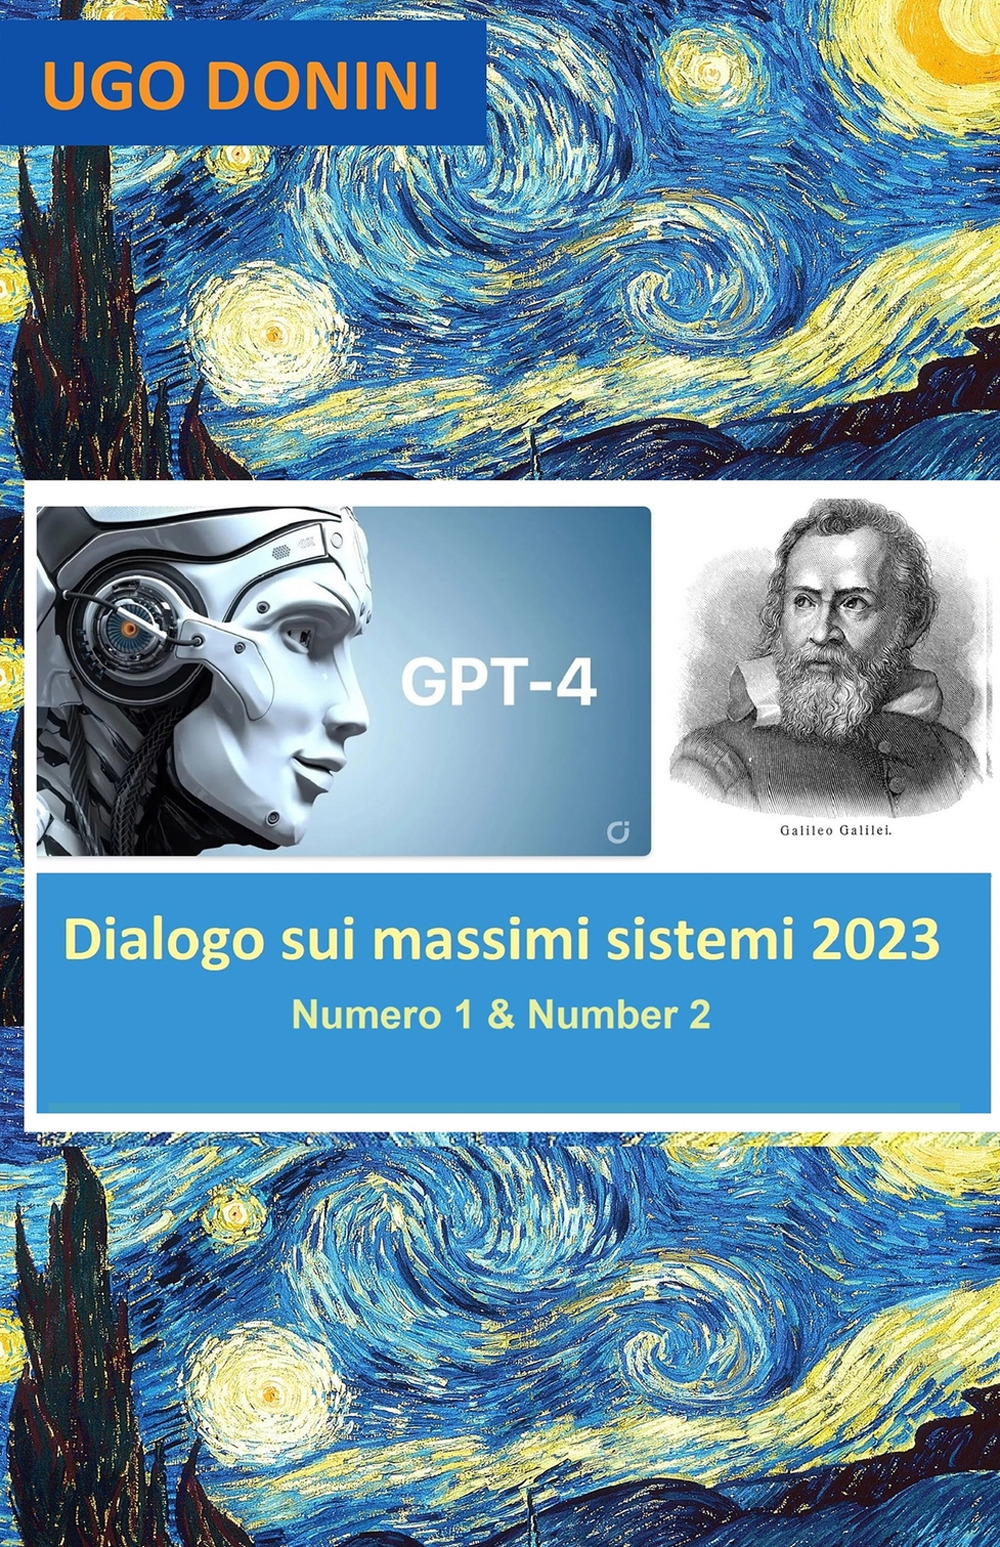 Dialogo sui massimi sistemi. Artificial Intelligence (AI) Gpt-4 is Salviati in a dialogue about the center of total danger to humanity: AI or Arms (2023). Vol. 1-2: Artificial Intelligence (AI) Gpt-4 is Salviati in a dialogue about the center of total dan